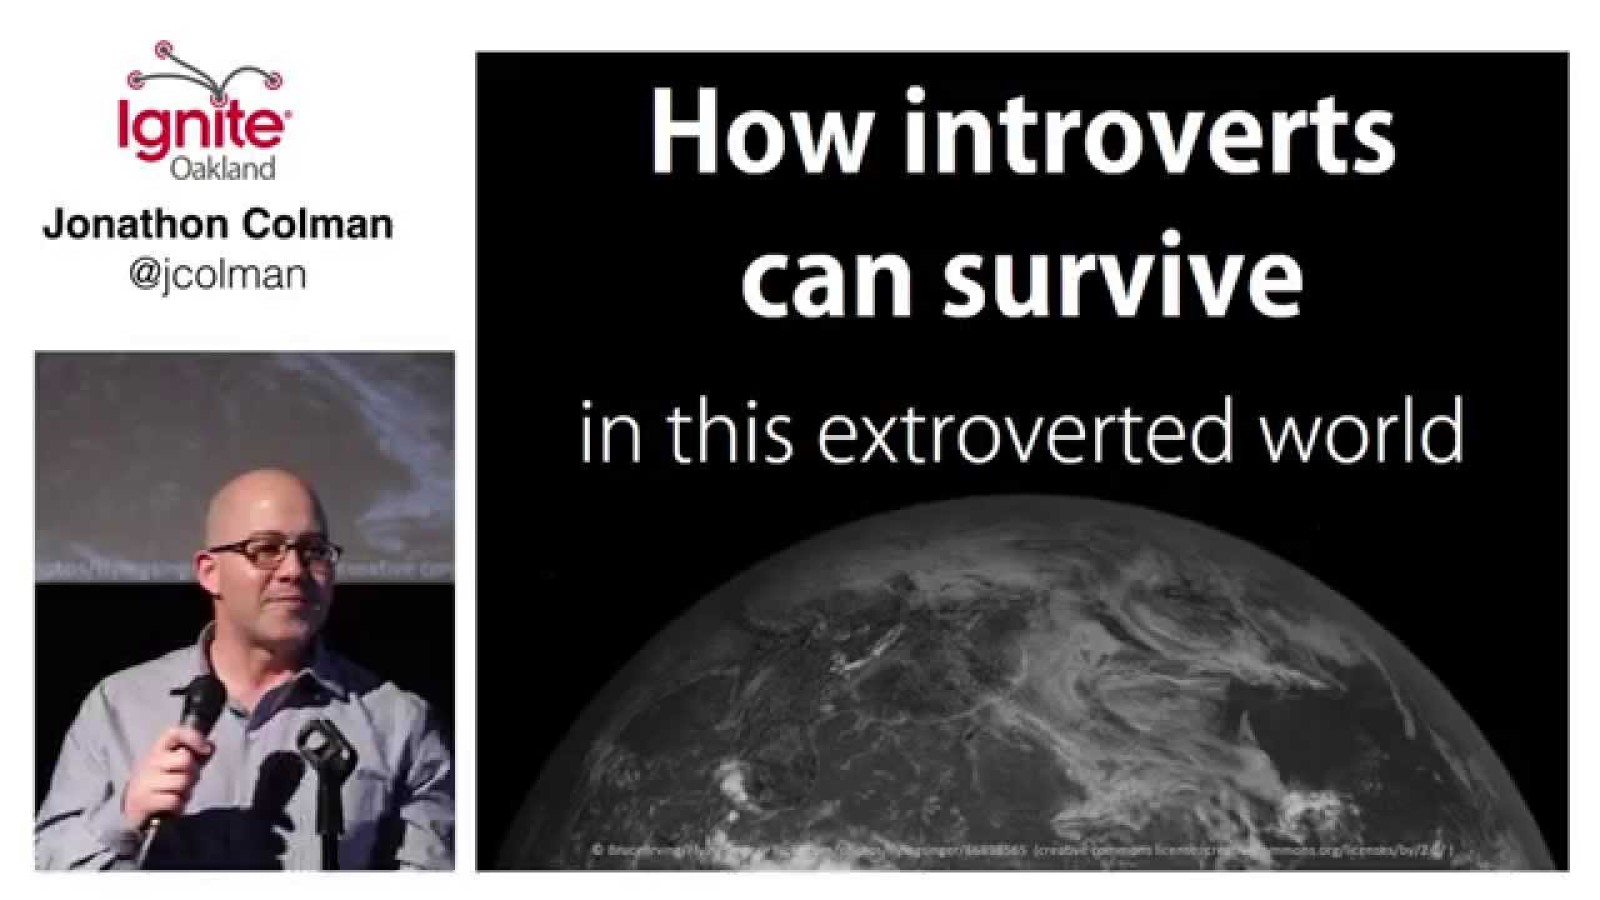 How Introverts Can Survive in This Extroverted World